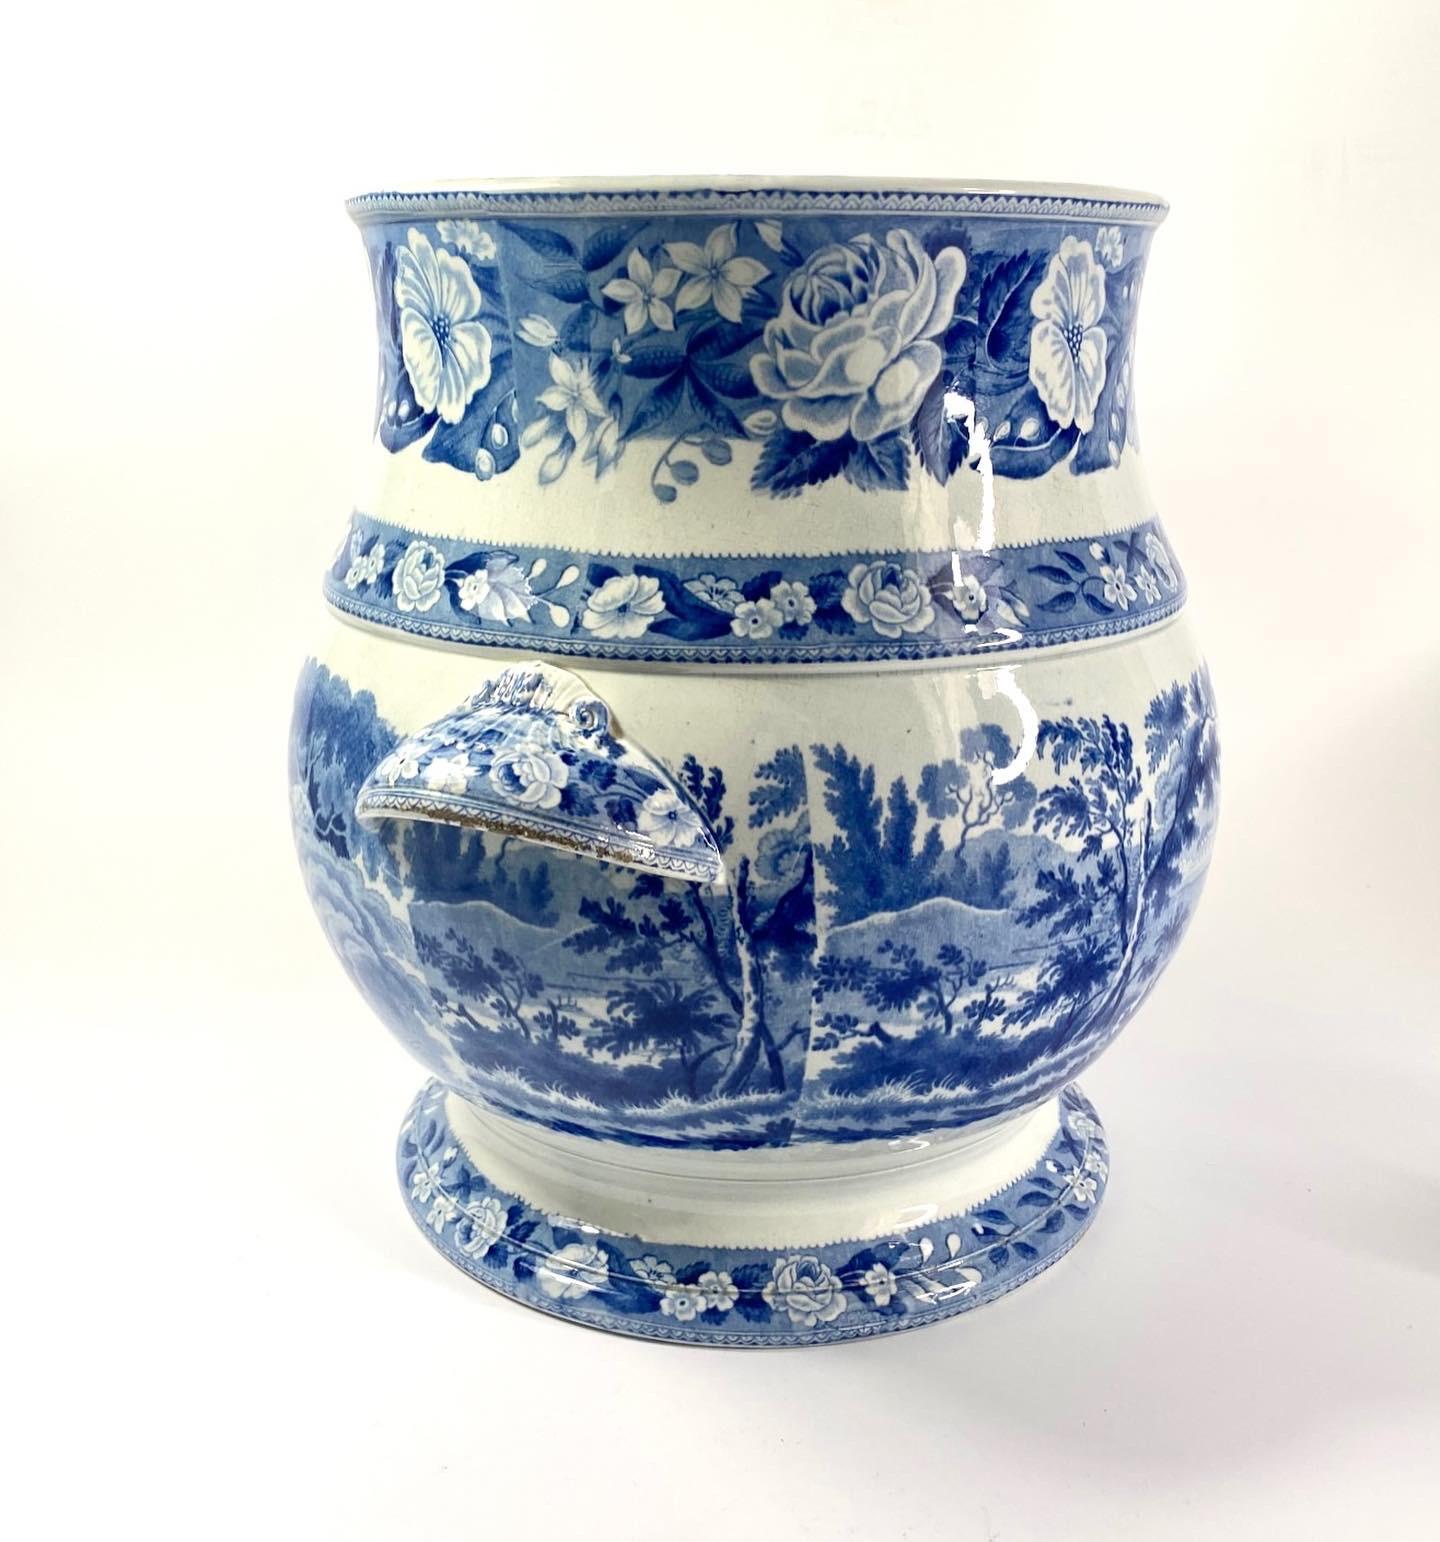 Mid-19th Century Staffordshire blue and white printed pail, c. 1830.